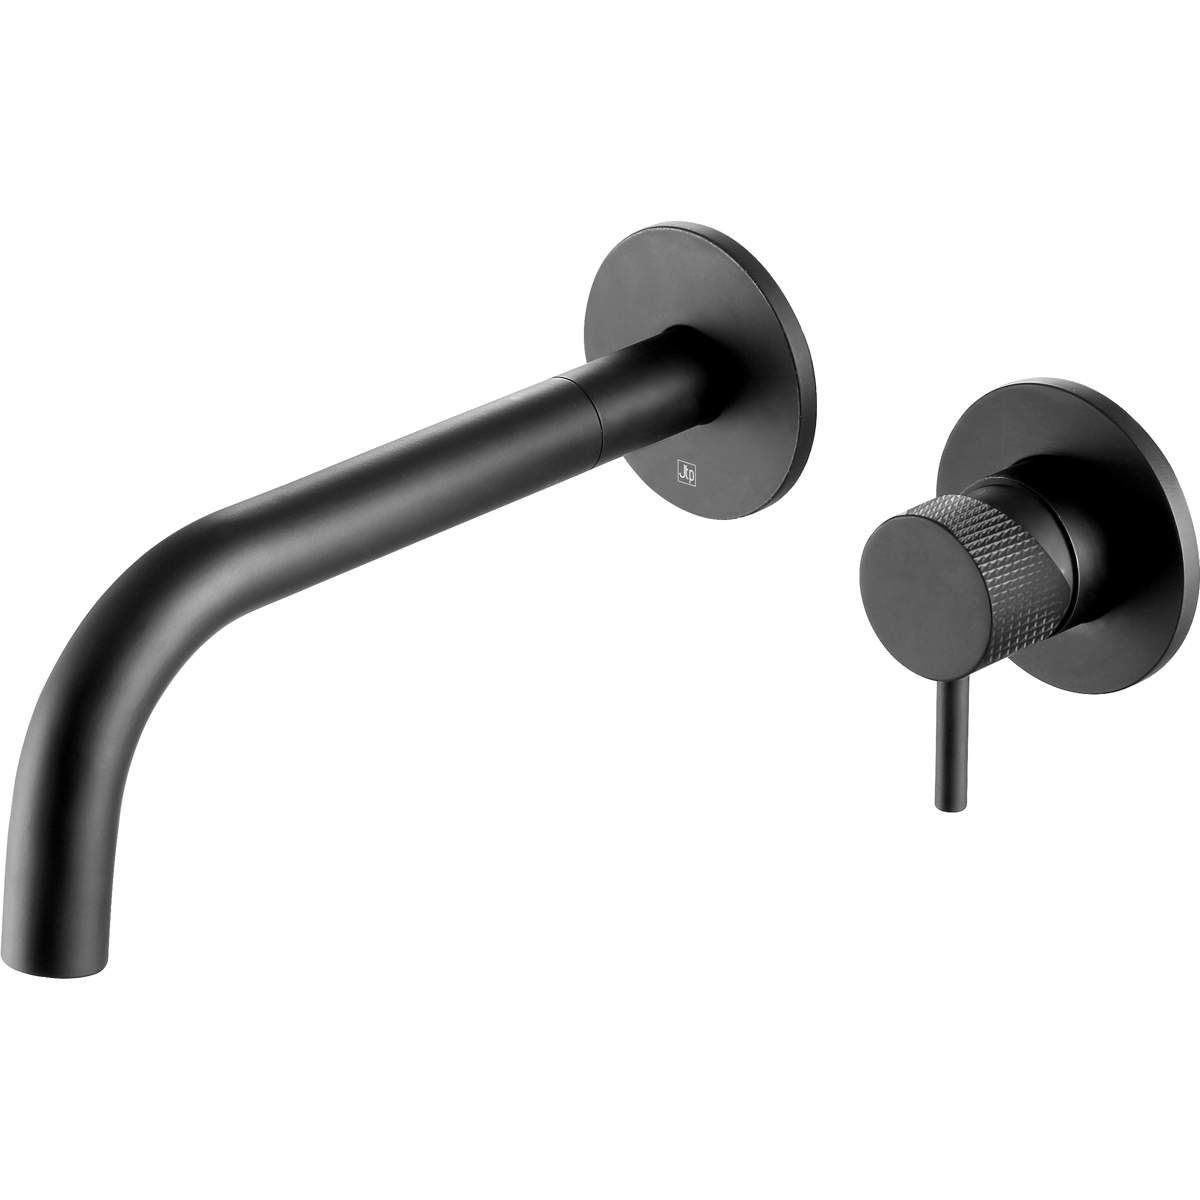 JTP Vos Matt Black Single Lever Wall Mounted Basin Mixer with Designer Handle and Spout 250mm. (DH28273MB)